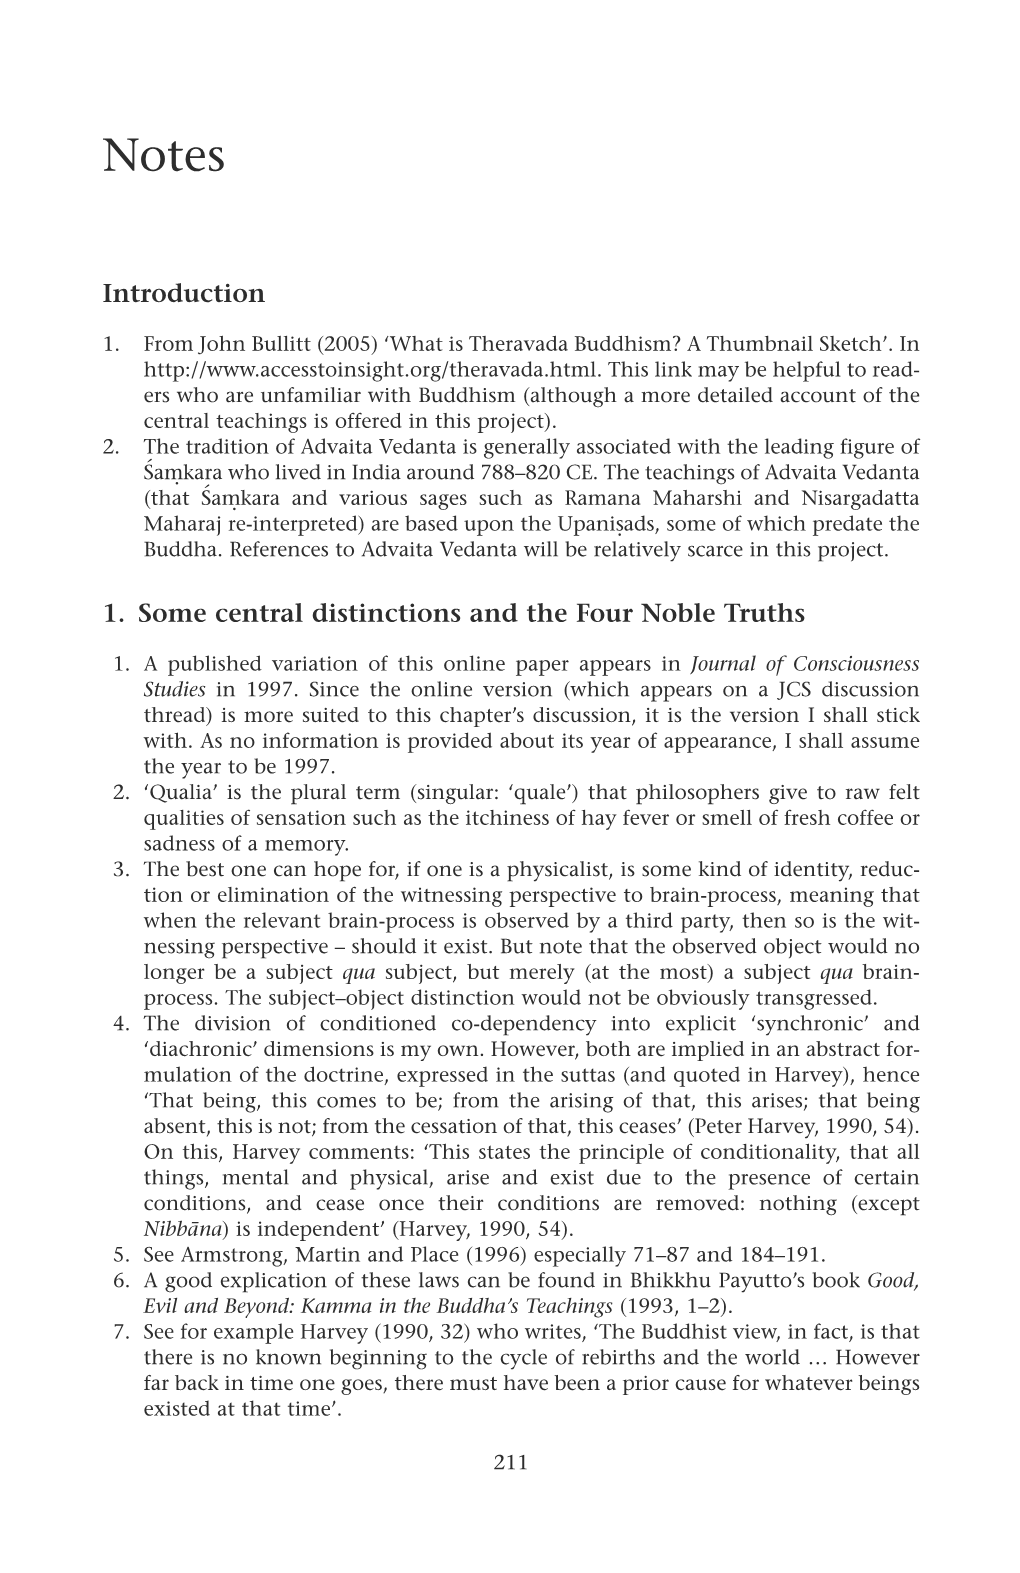 Introduction 1. Some Central Distinctions and the Four Noble Truths